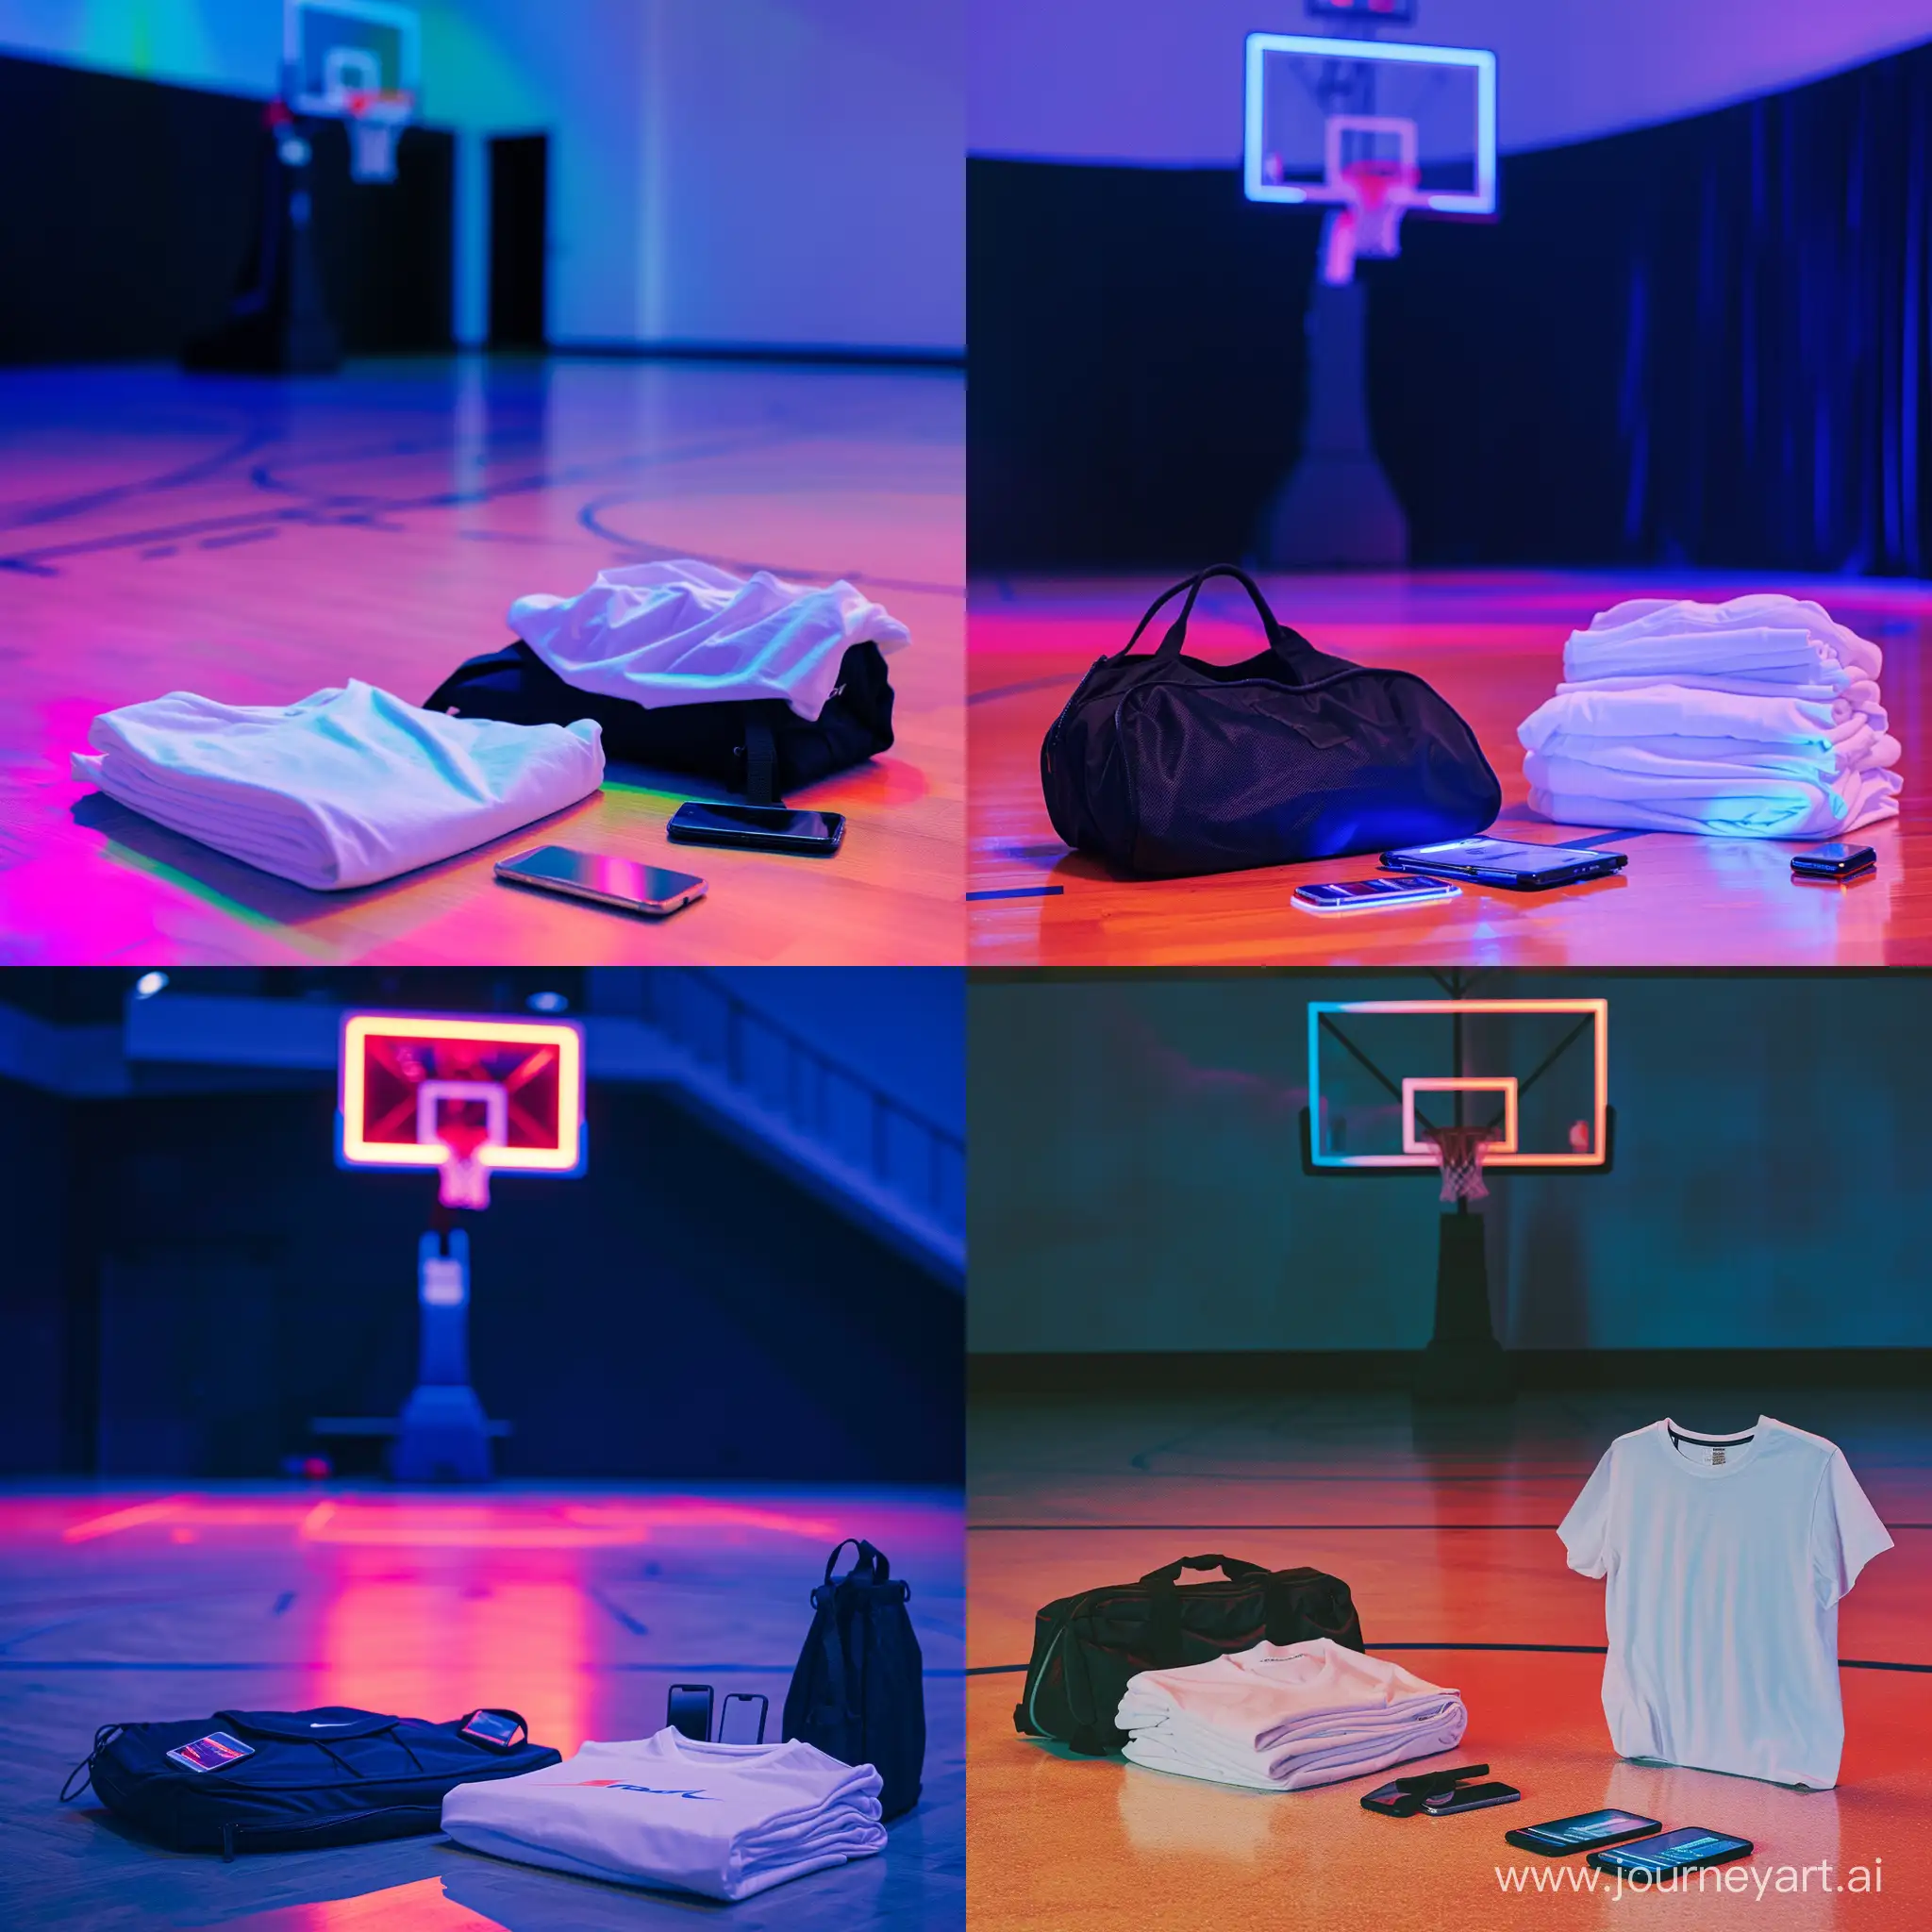 Neon-Basketball-Court-Scene-with-Folded-TShirt-and-Mobile-Phones